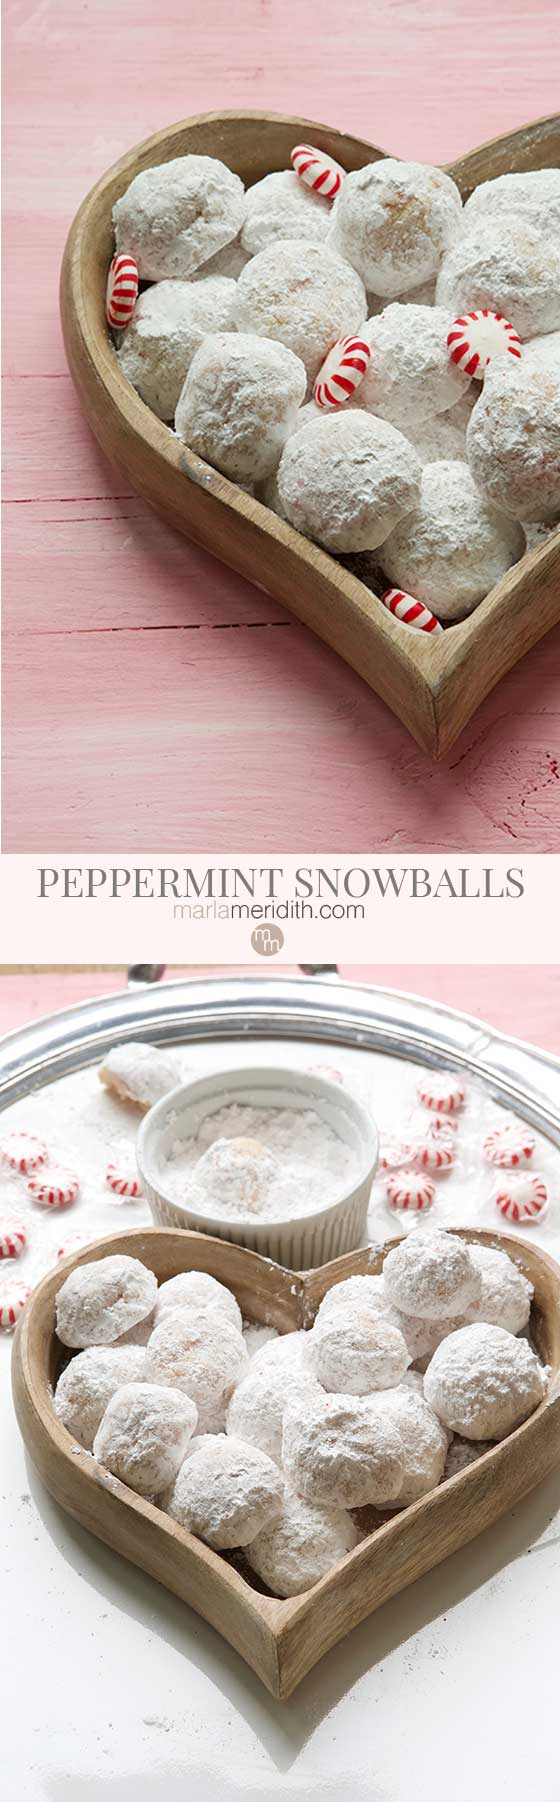 I love regular snowball cookies, but add crushed peppermint candies and you have something even more special! Get the recipe on MarlaMeridith.com